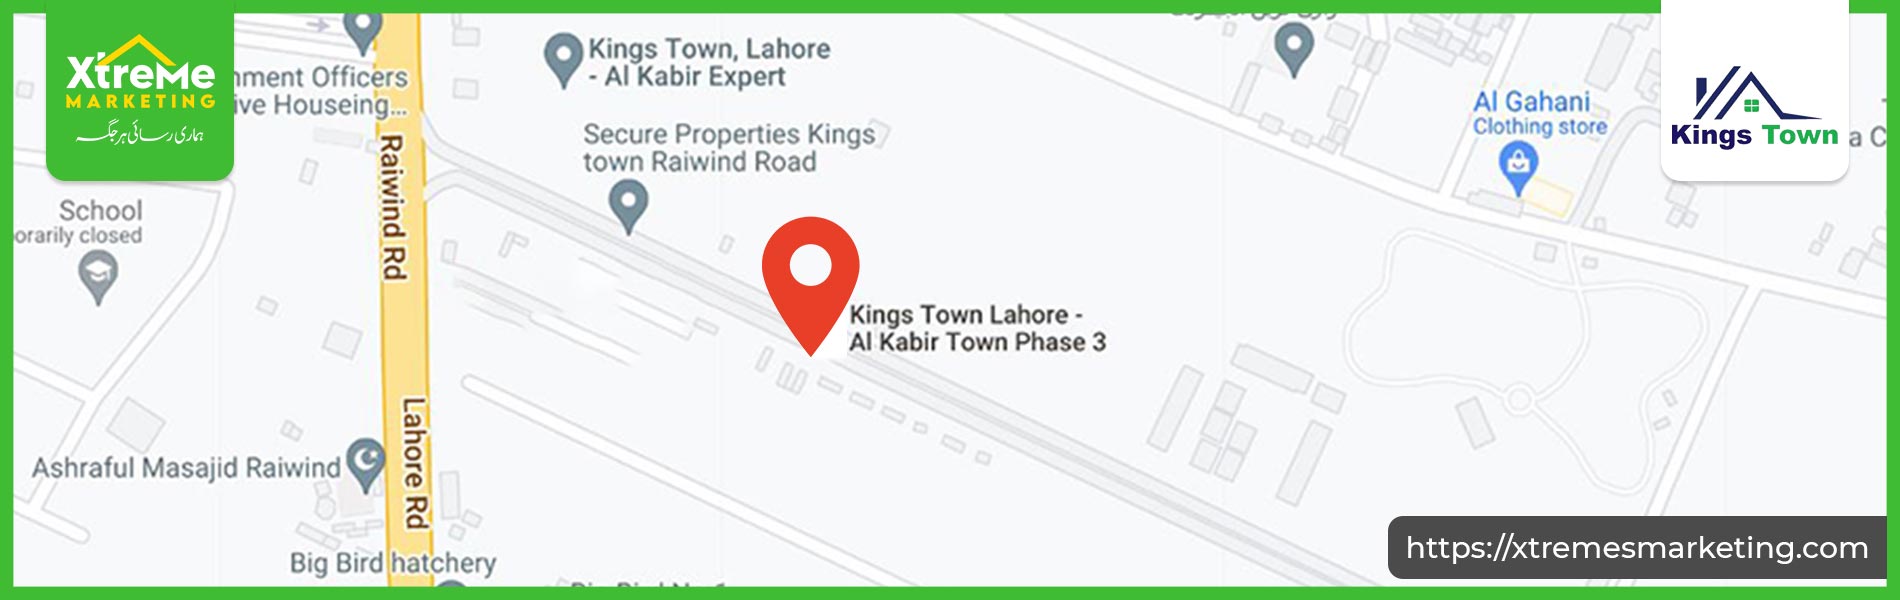 Kings Town Lahore location